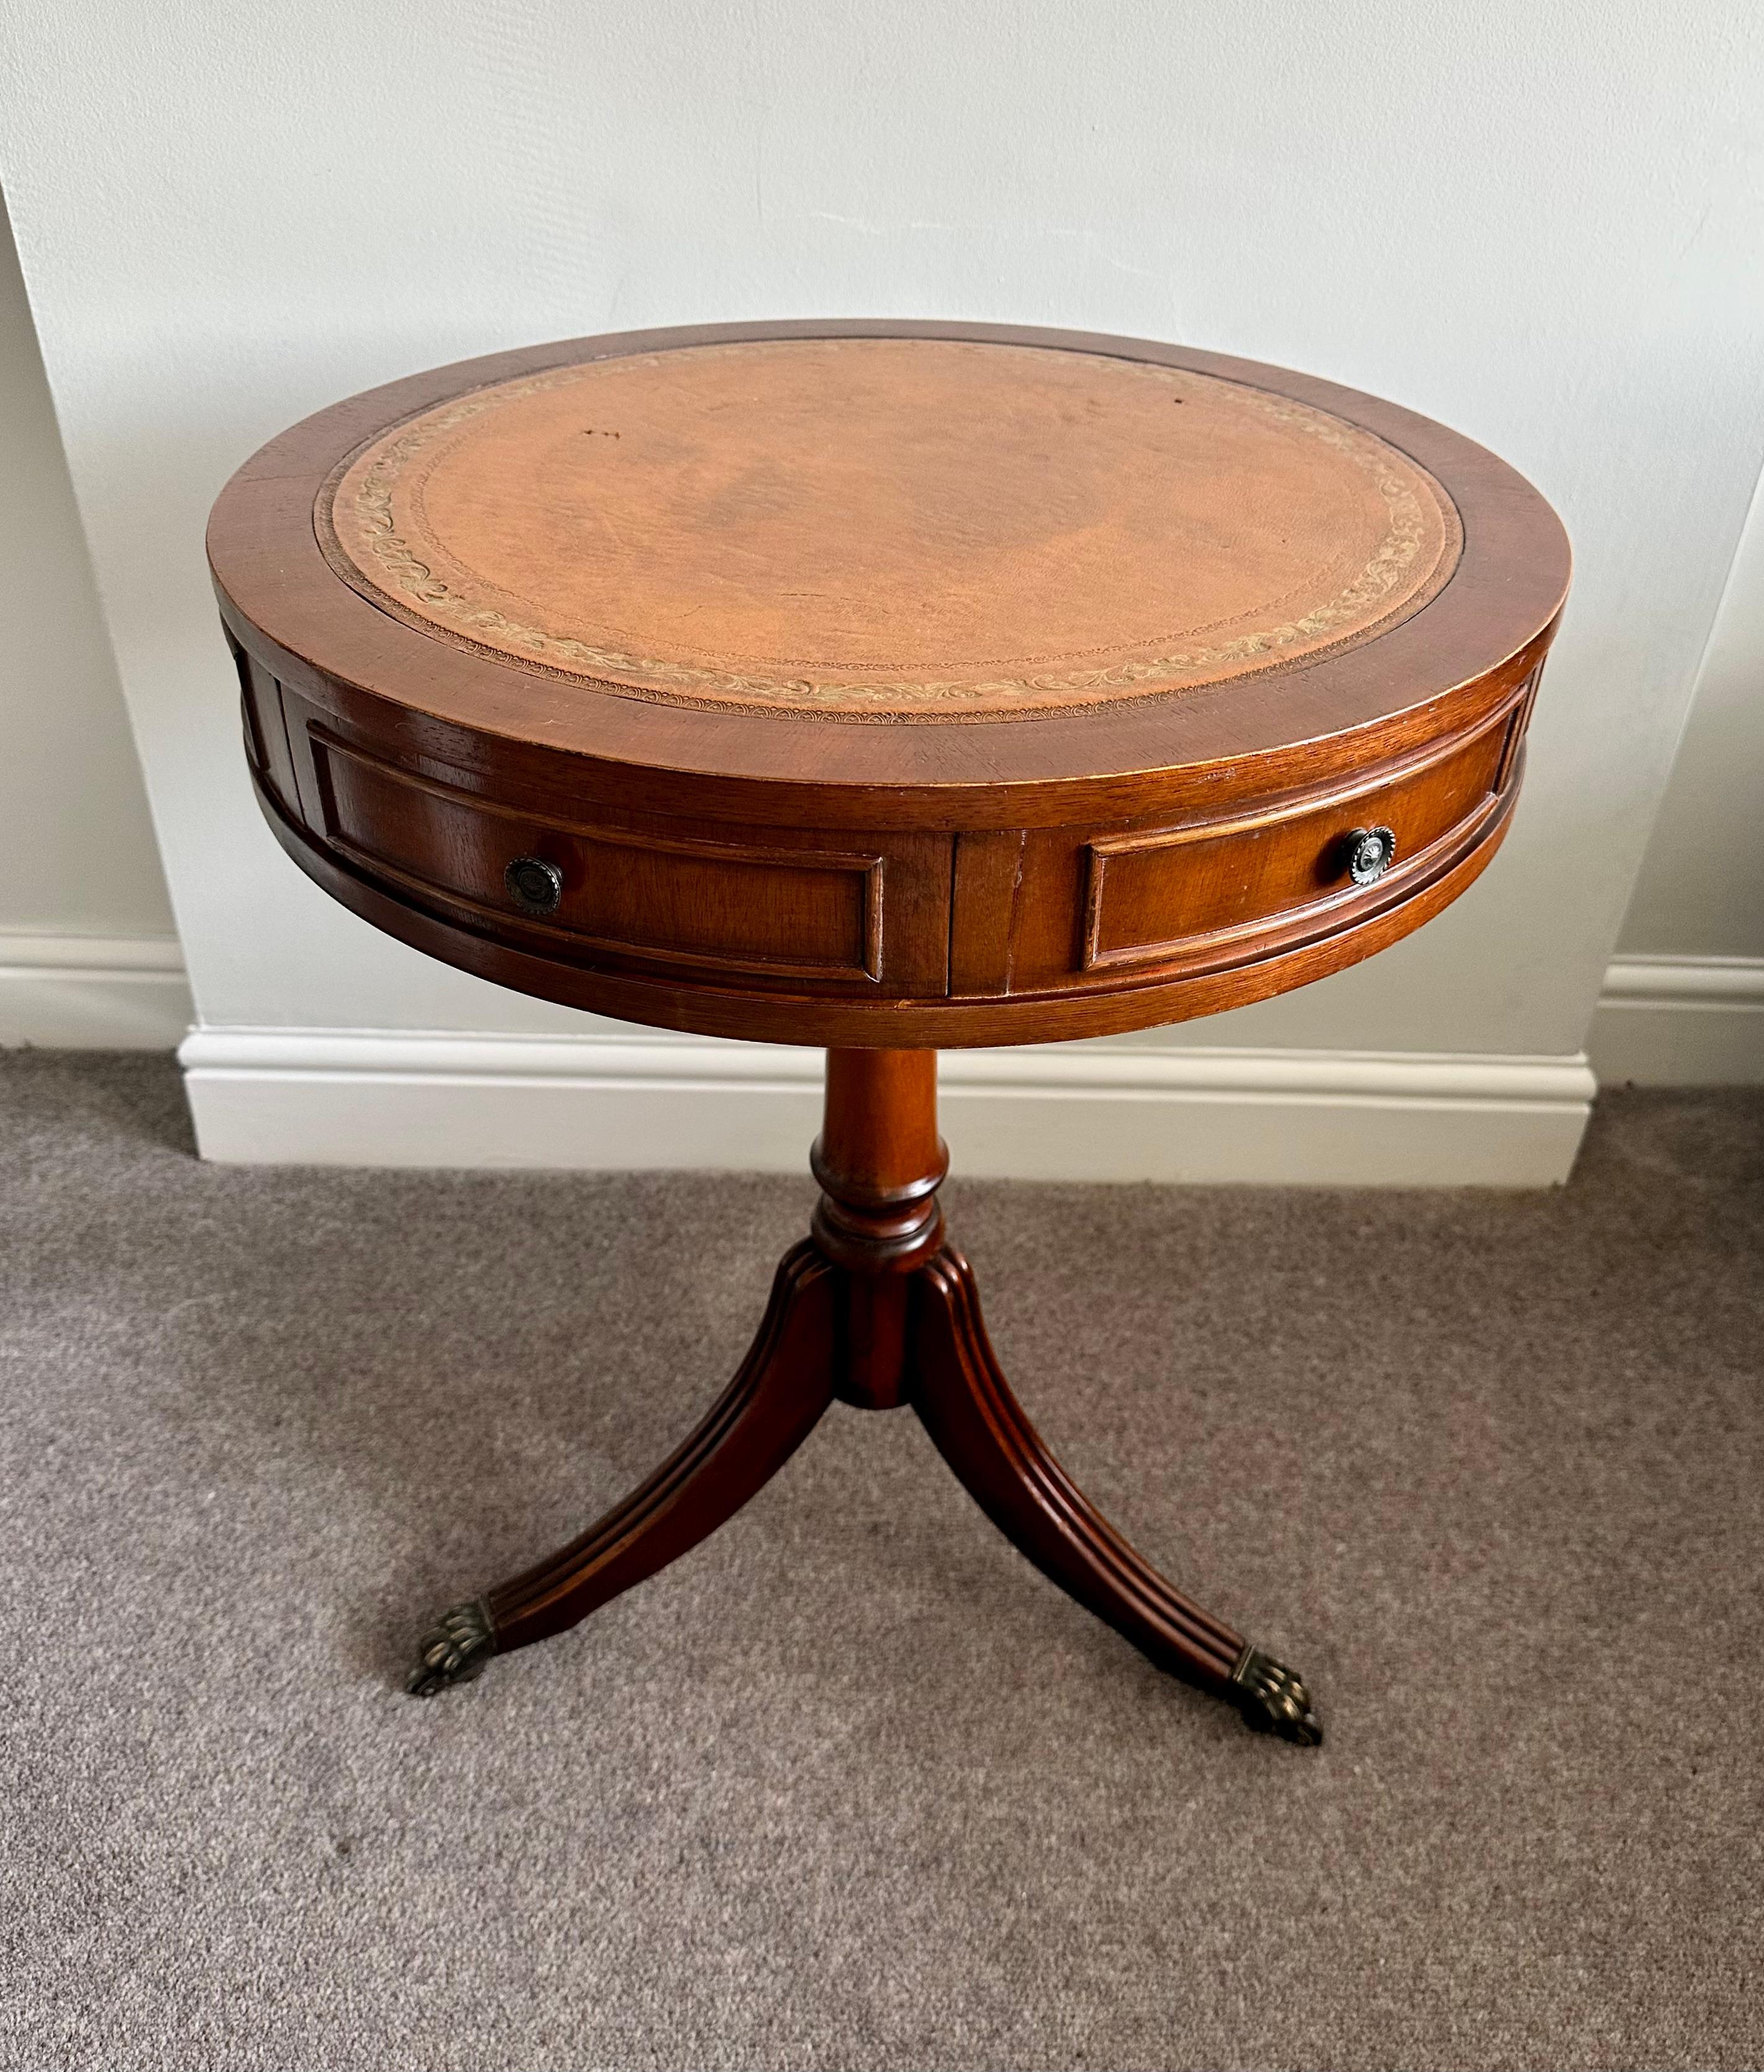 Here we have for sale this lovely Regency style drum table with mahogany frame and tan leather top. 

A very good looking well made and decorative piece, ideally suited as a lamp wine or side table. It has been lightly restored to include a clean